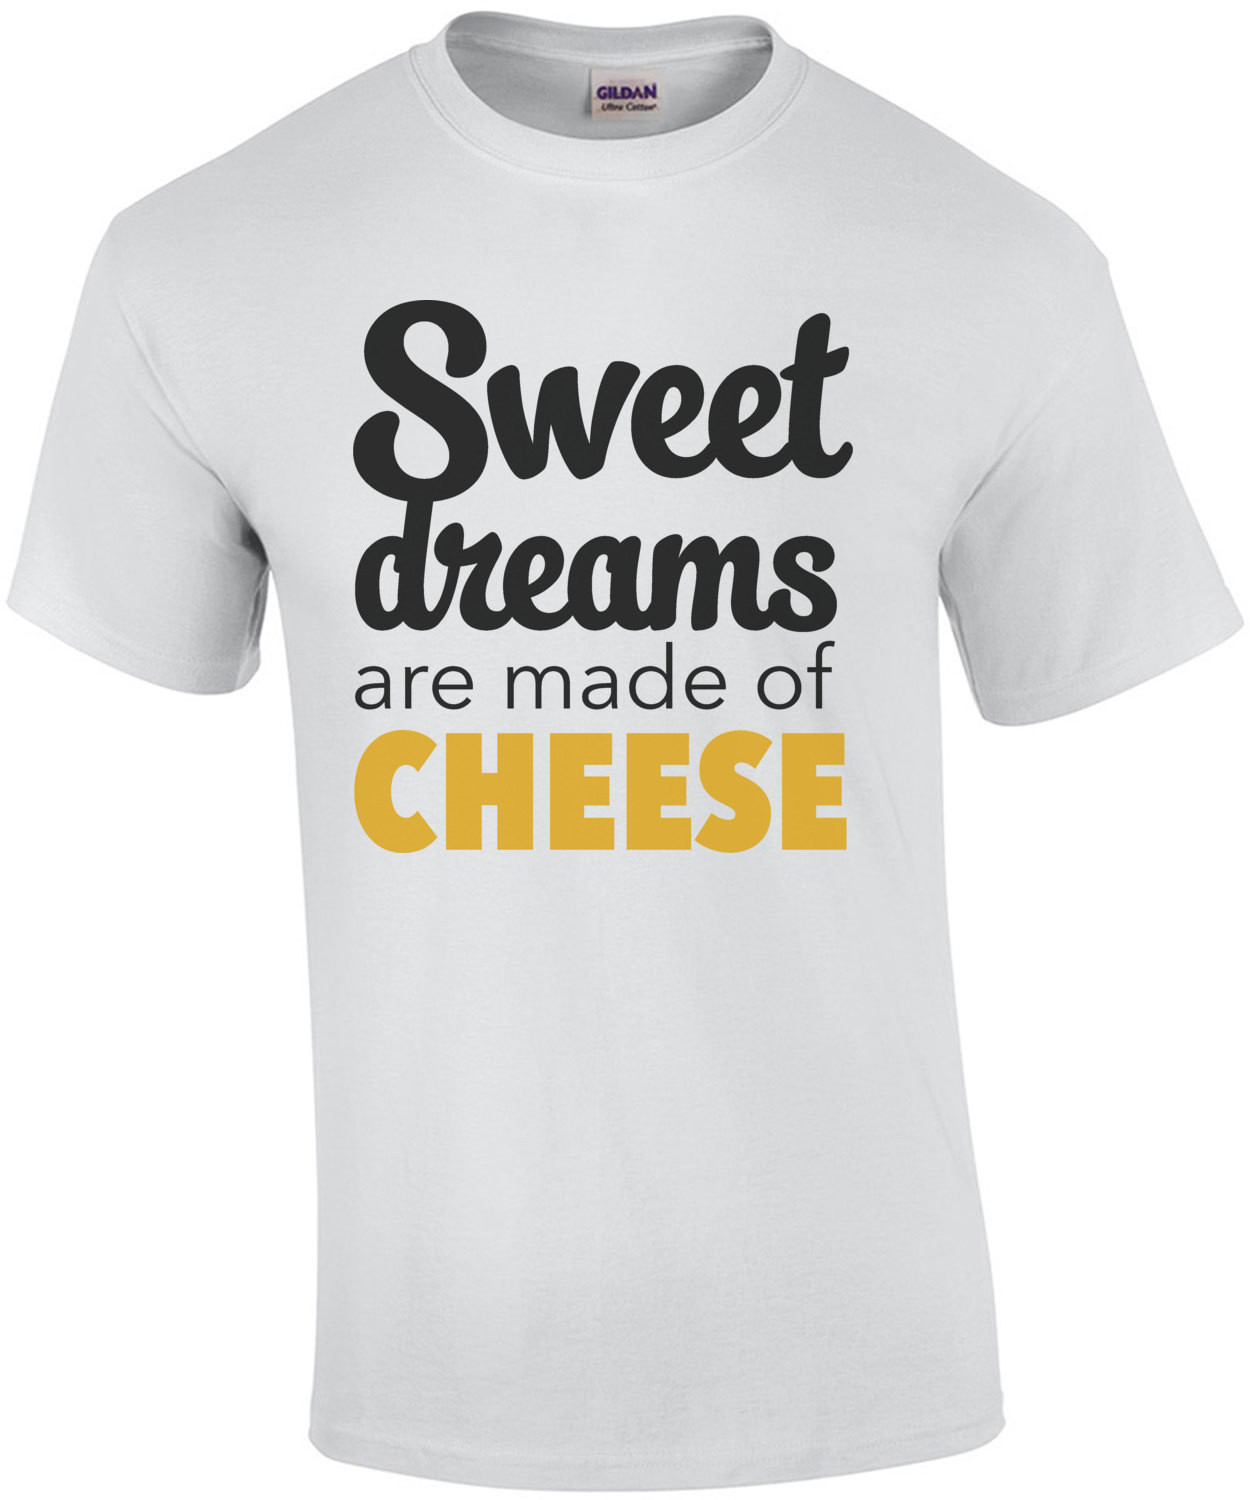 Sweet dreams are made of cheese - funny cheese t-shirt